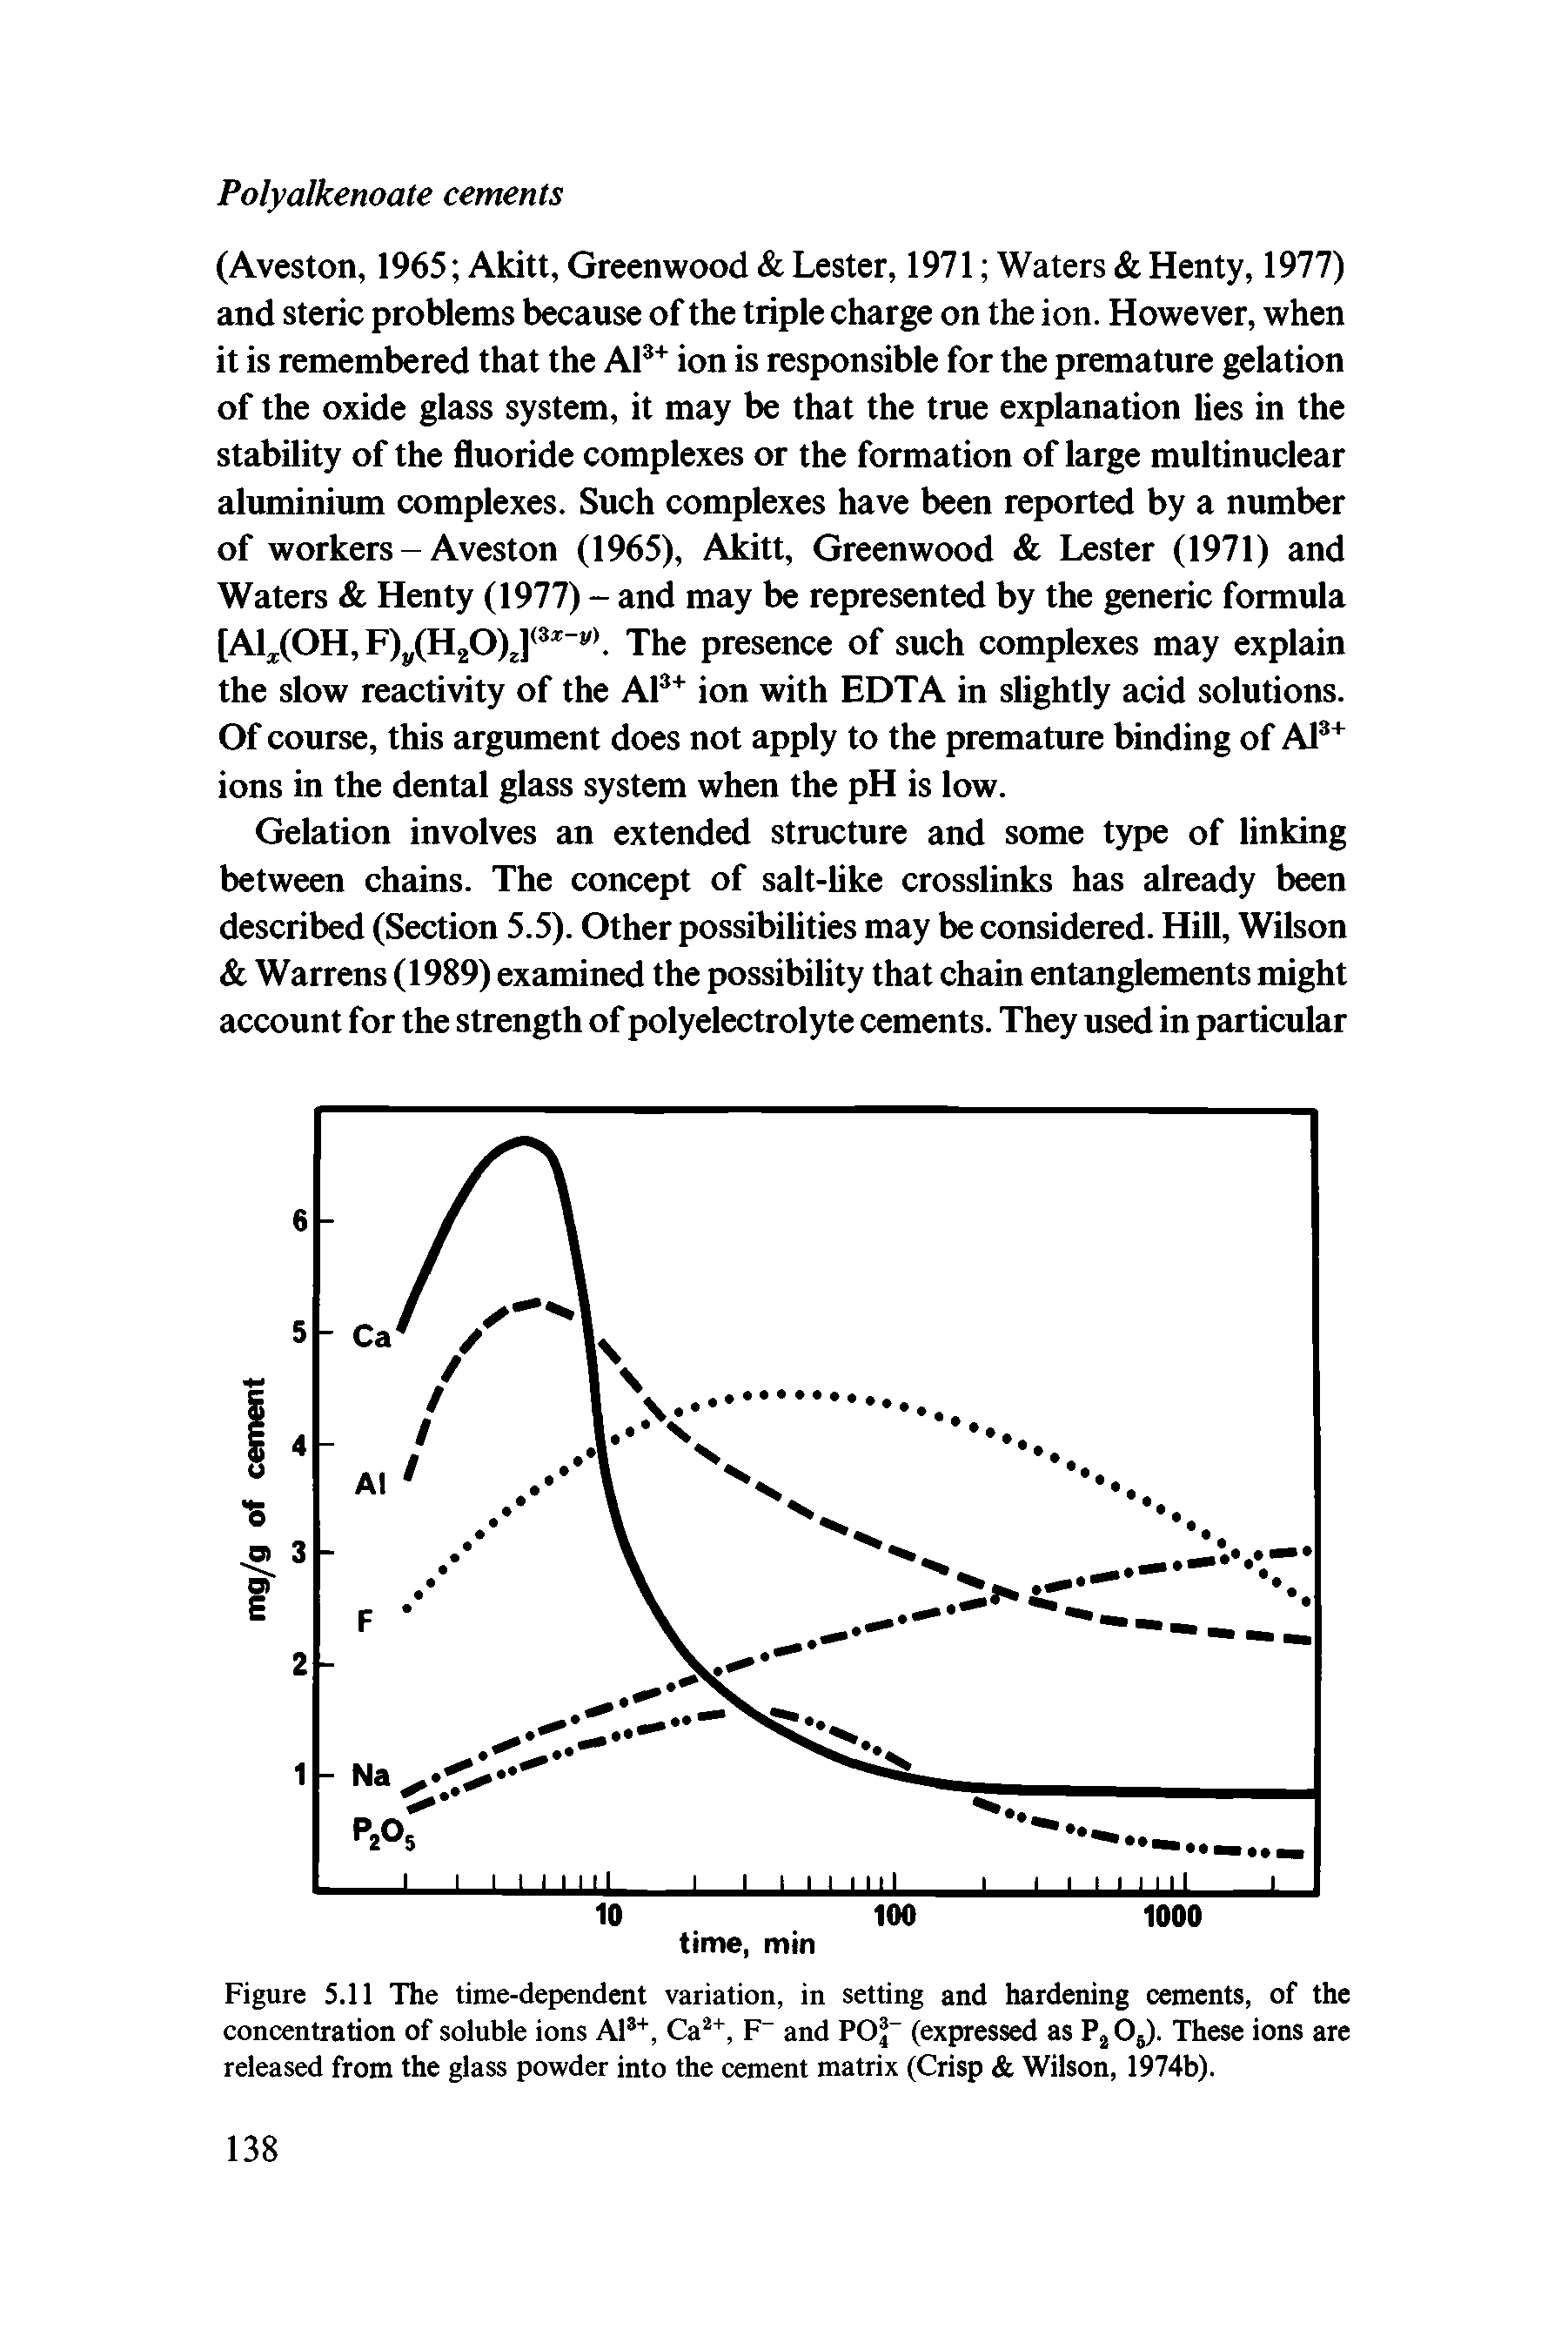 Figure 5.11 The time-dependent variation, in setting and hardening cements, of the concentration of soluble ions Al ", Ca, F and PO (expressed as P Oj). These ions are released from the glass powder into the cement matrix (Crisp Wilson, 1974b).